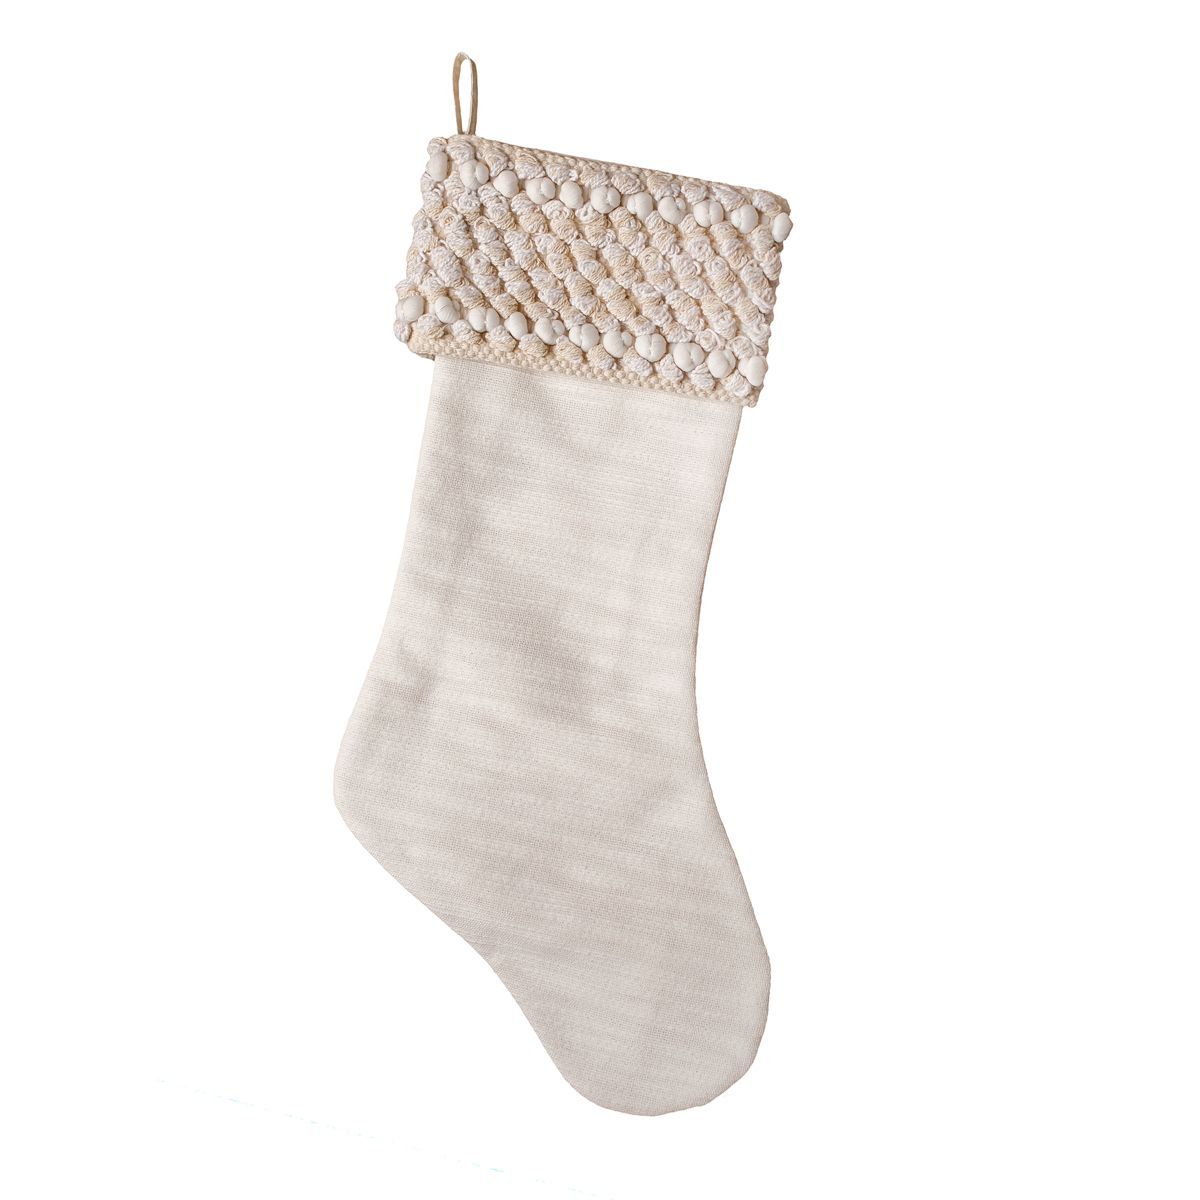 HGTV Home Collection Textured Cuff Cotton Woven Christmas Stocking, Ivory, 20 in | Target